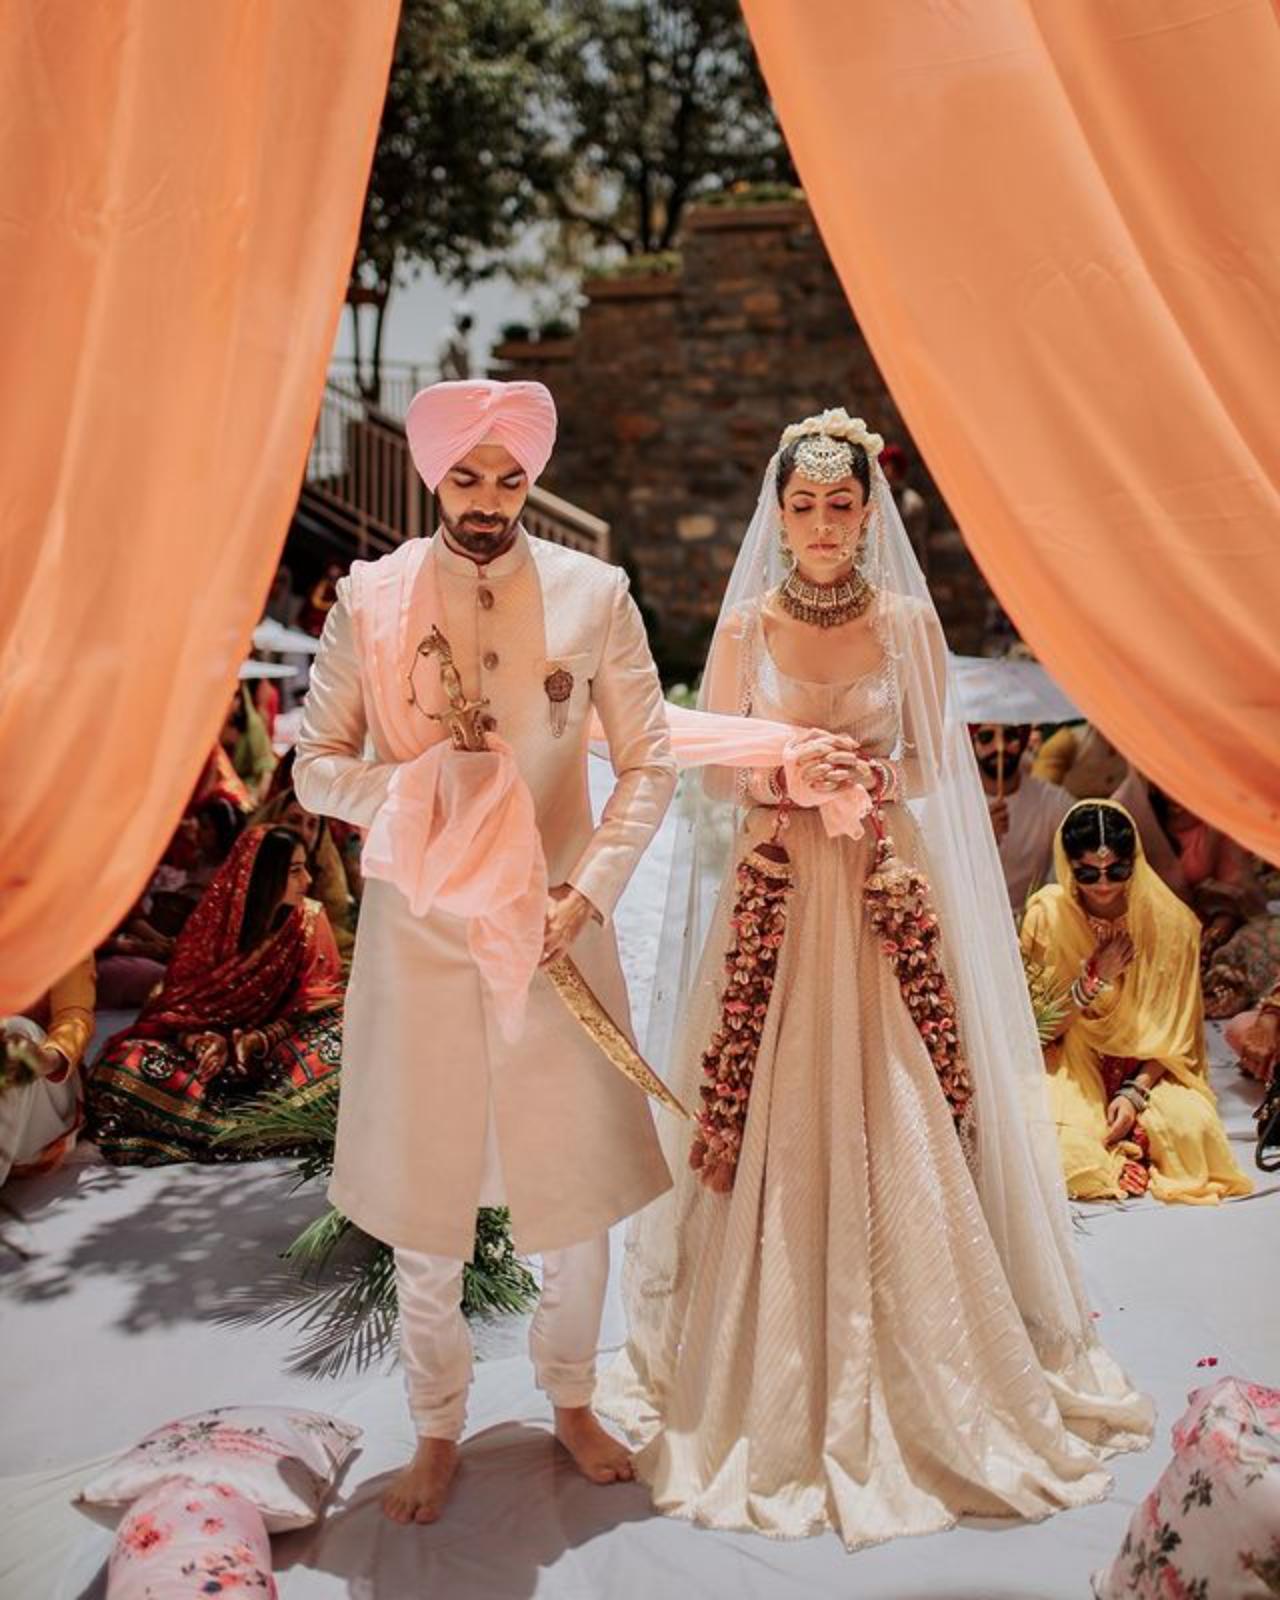 Actor-couple Karan V Grover and Poppy Jabbal, who have been dating for a long time, tied the knot on May 31st, 2022